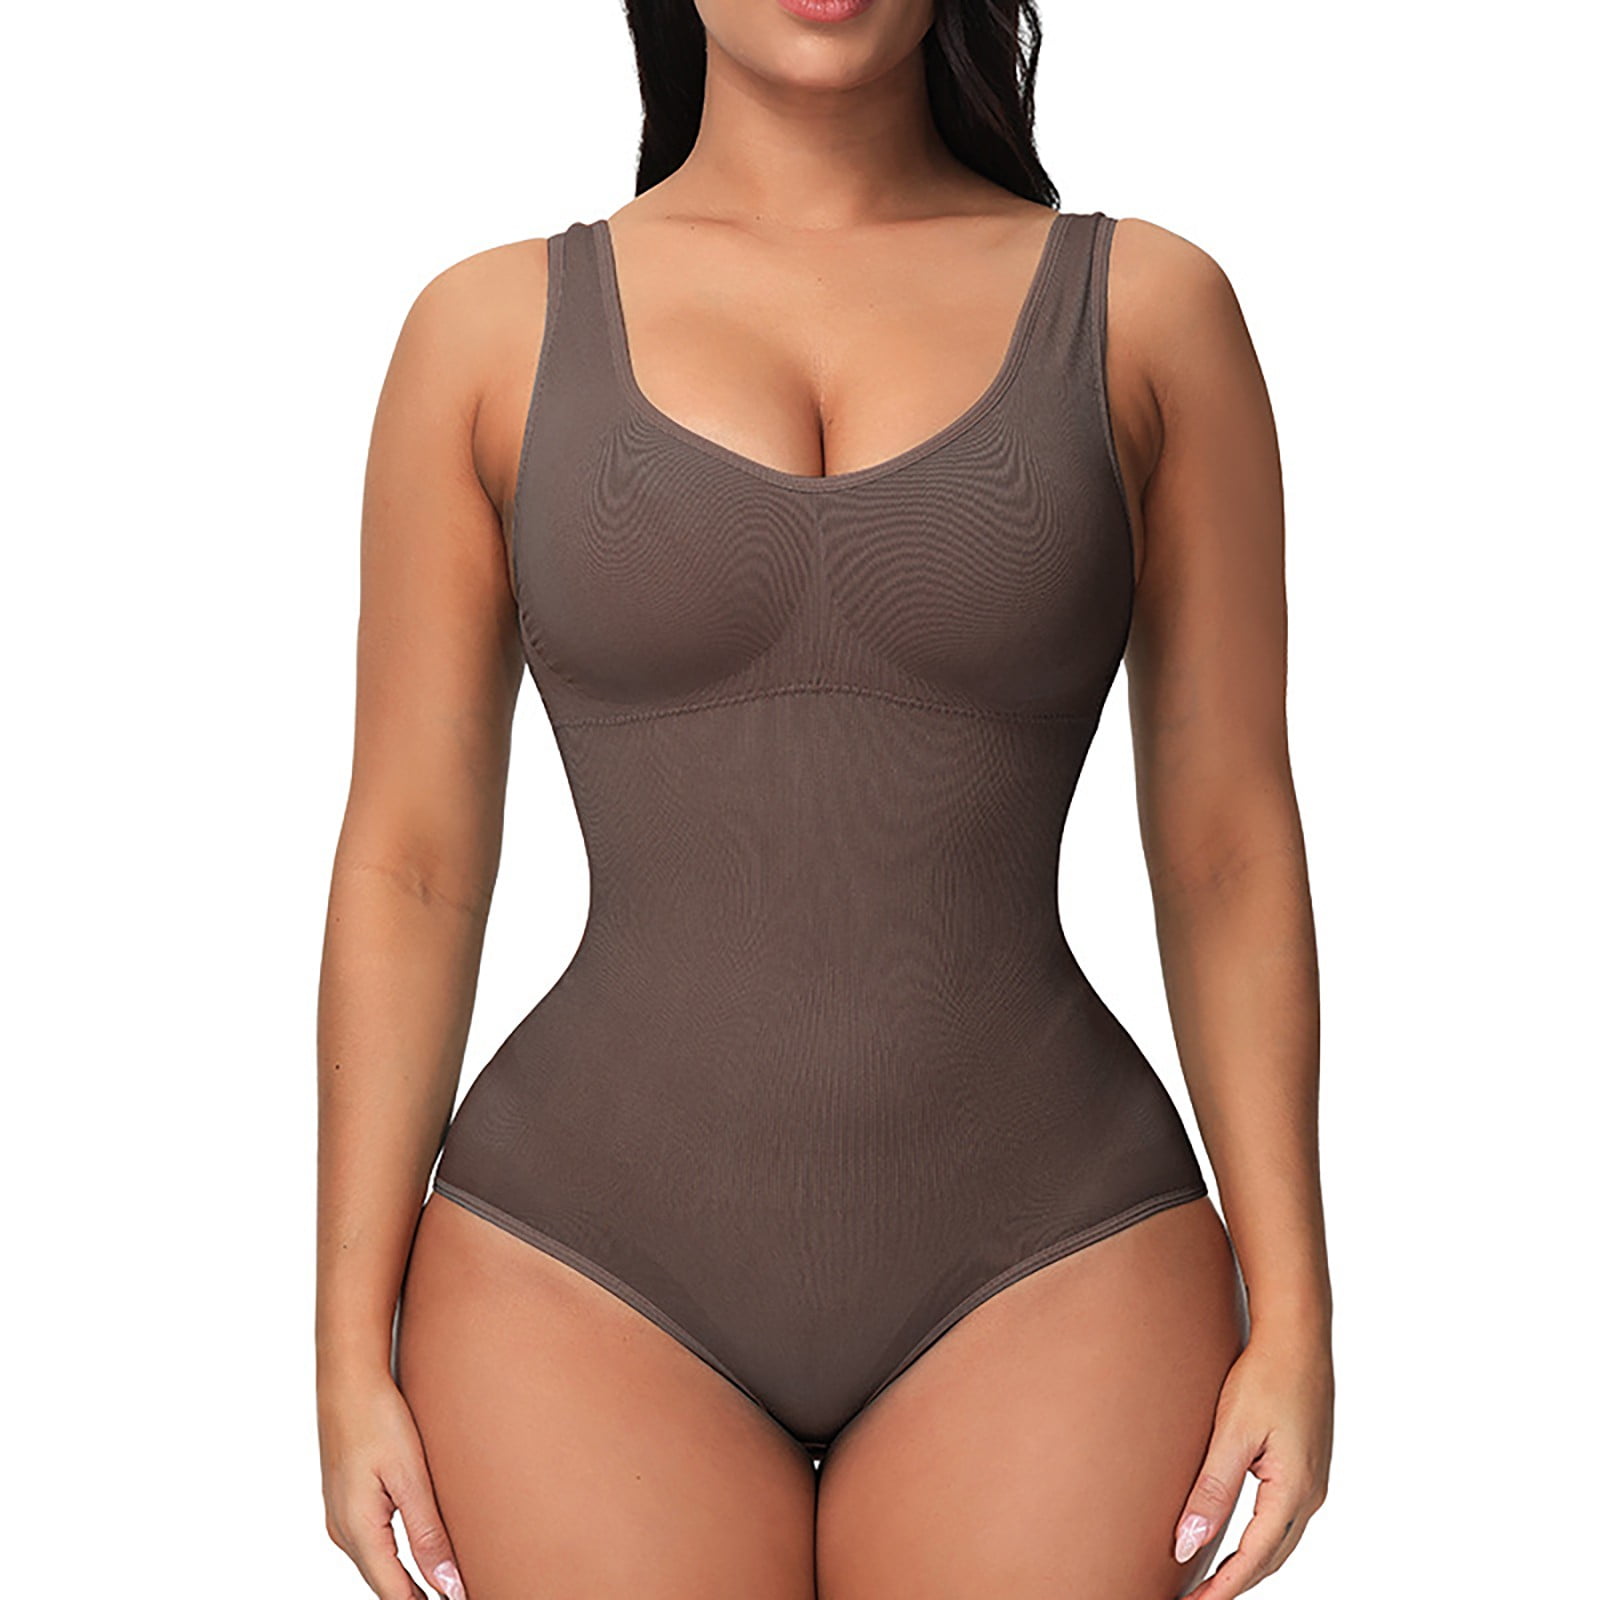  OLLOUM Athartle Body Suit Shapewear, Reteowlepena Bodysuit  Shape Wear, Shapewear Bodysuit, Shapewear for Women Tummy Control (Color :  Brown-Boxer, Size : Small) : Clothing, Shoes & Jewelry